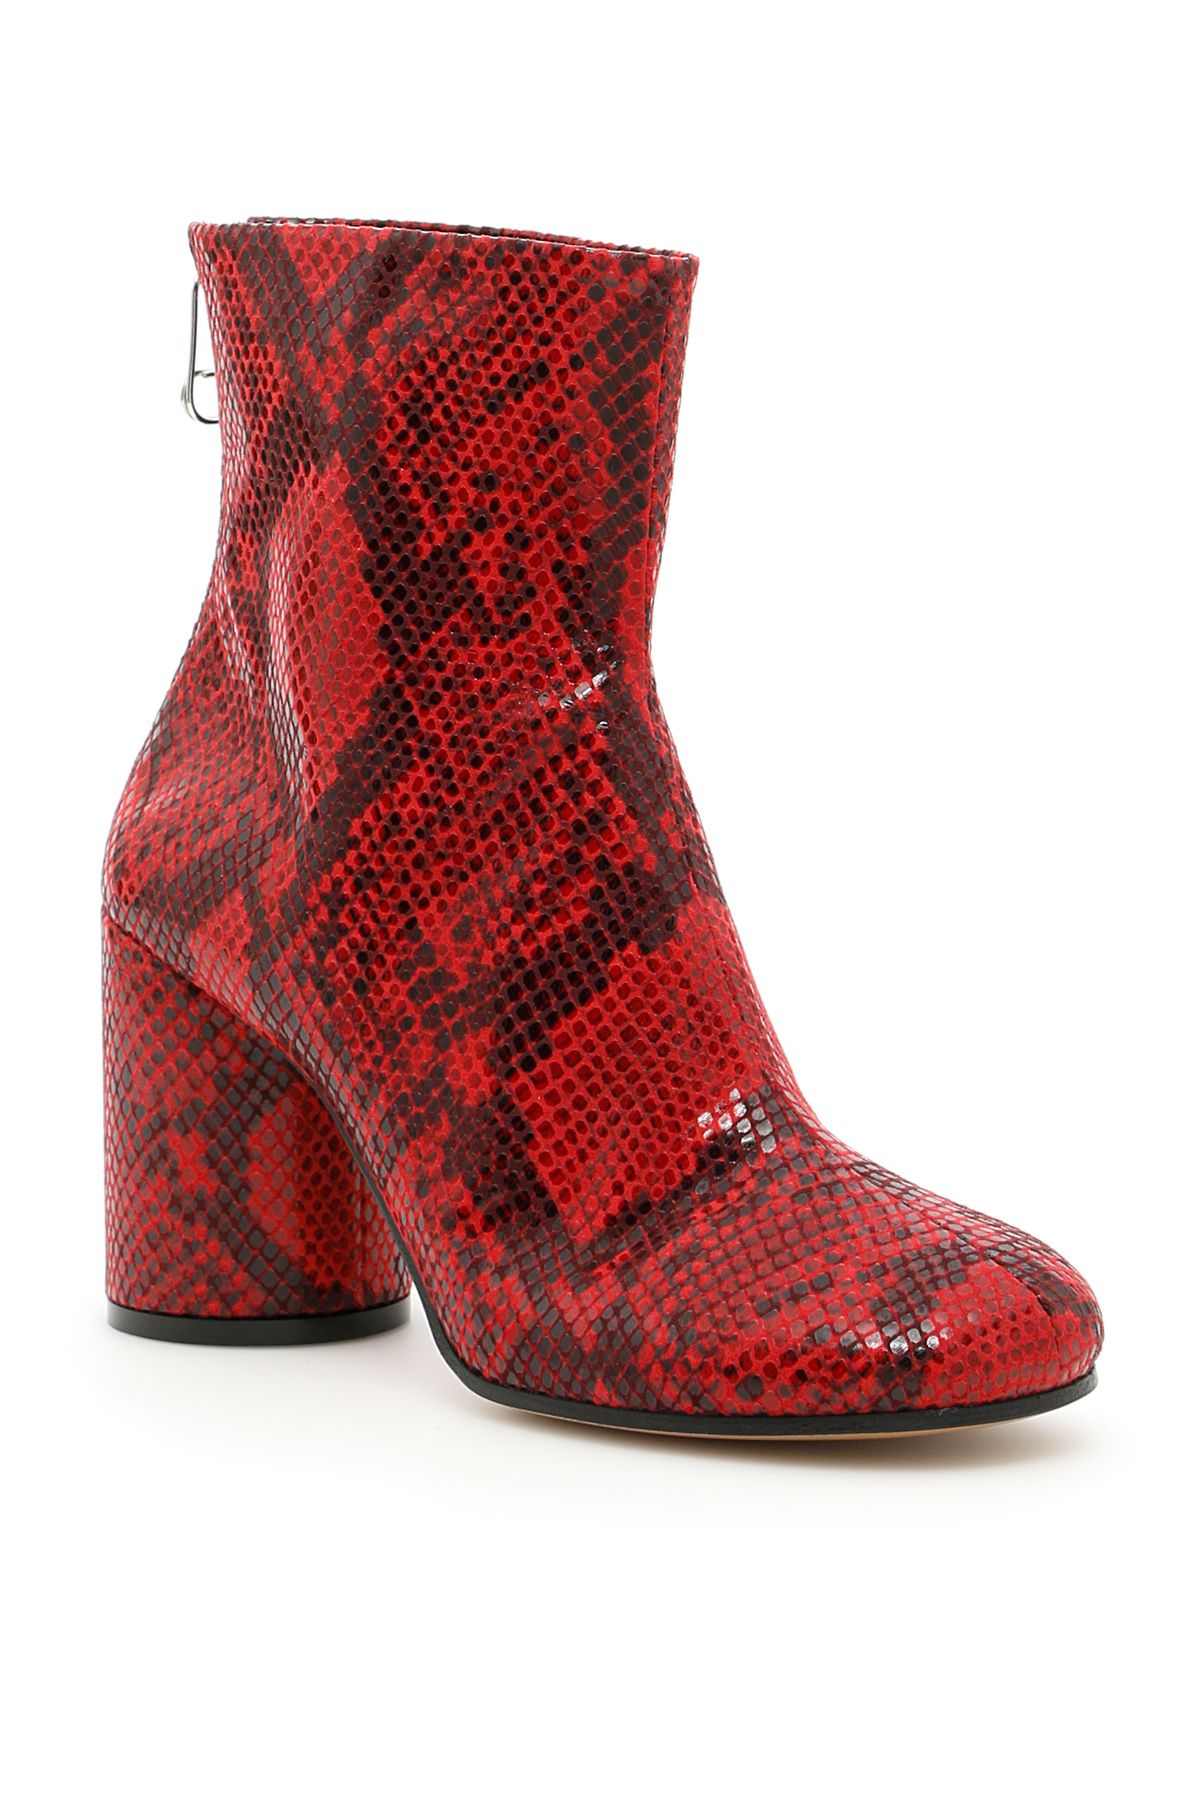 Maison Margiela - Python Print Booties - RED|Rosso, Women's Boots | Italist